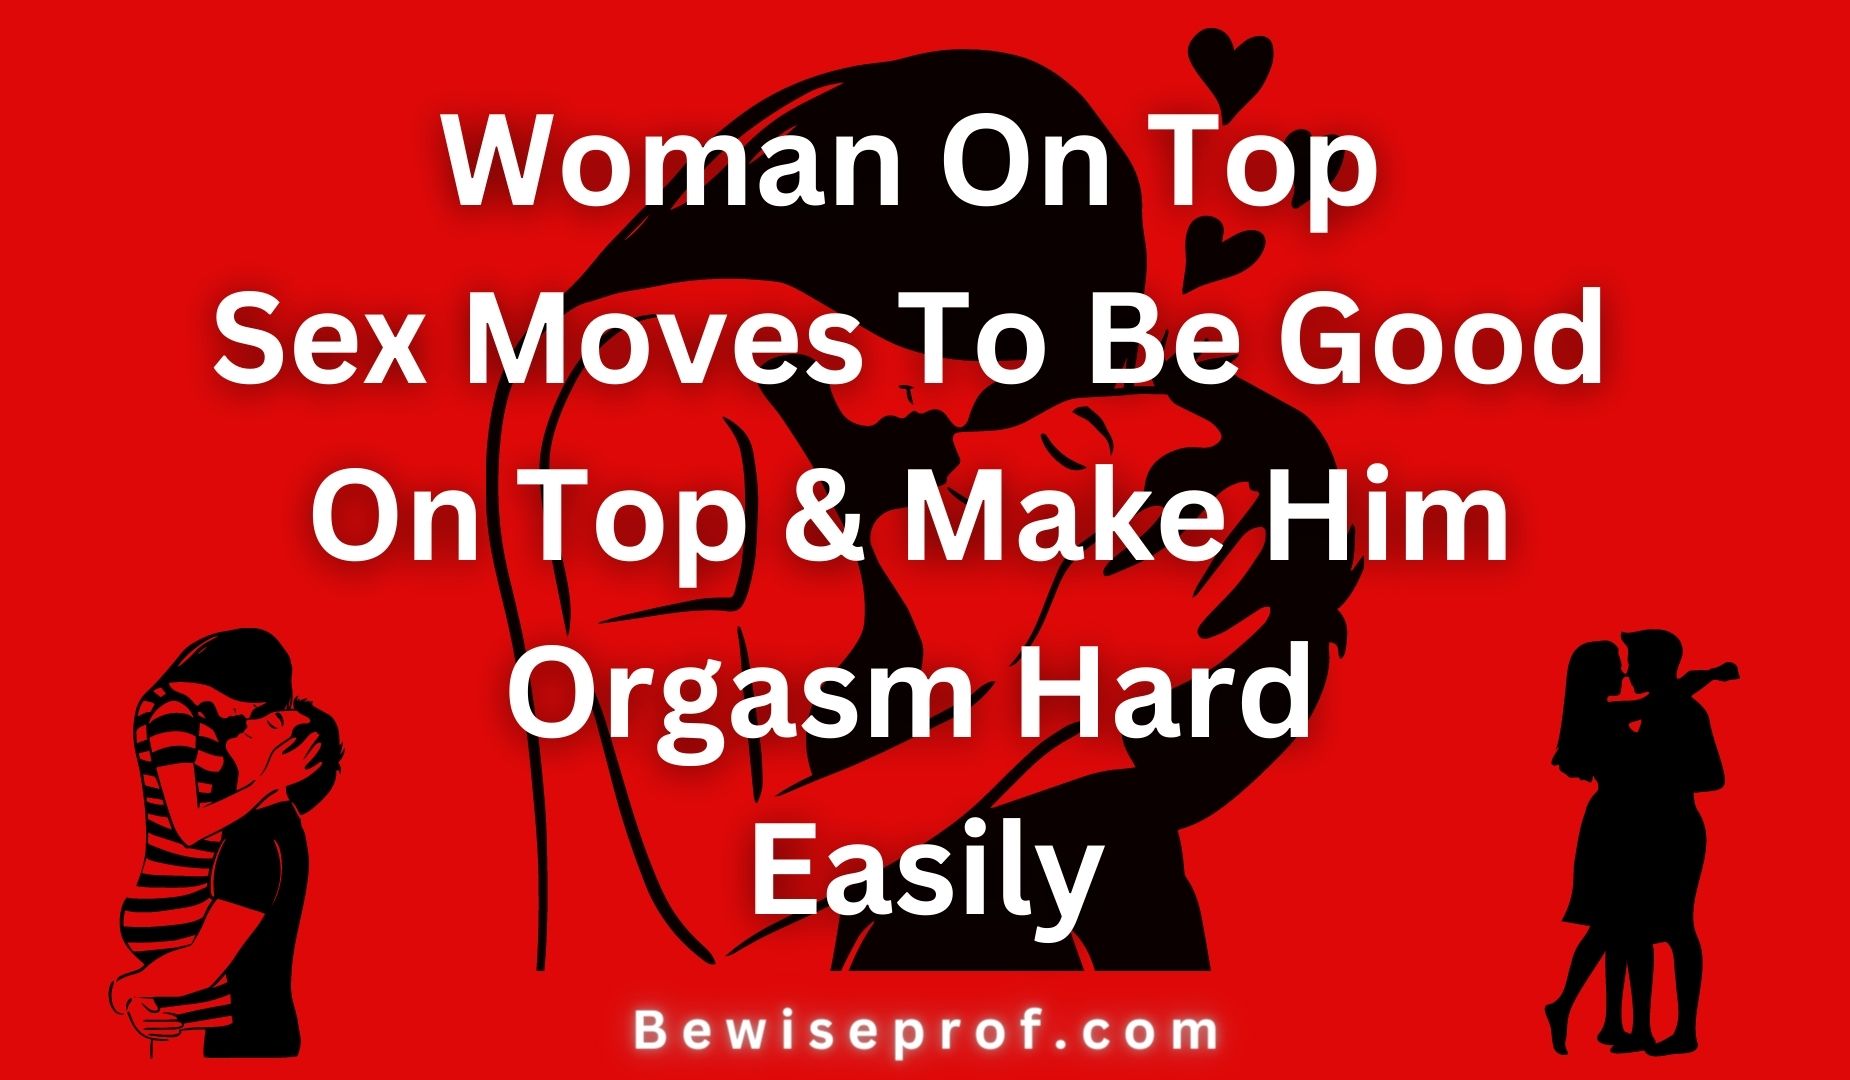 Woman On Top Sex Moves To Be Good On Top & Make Him Orgasm Hard Easily